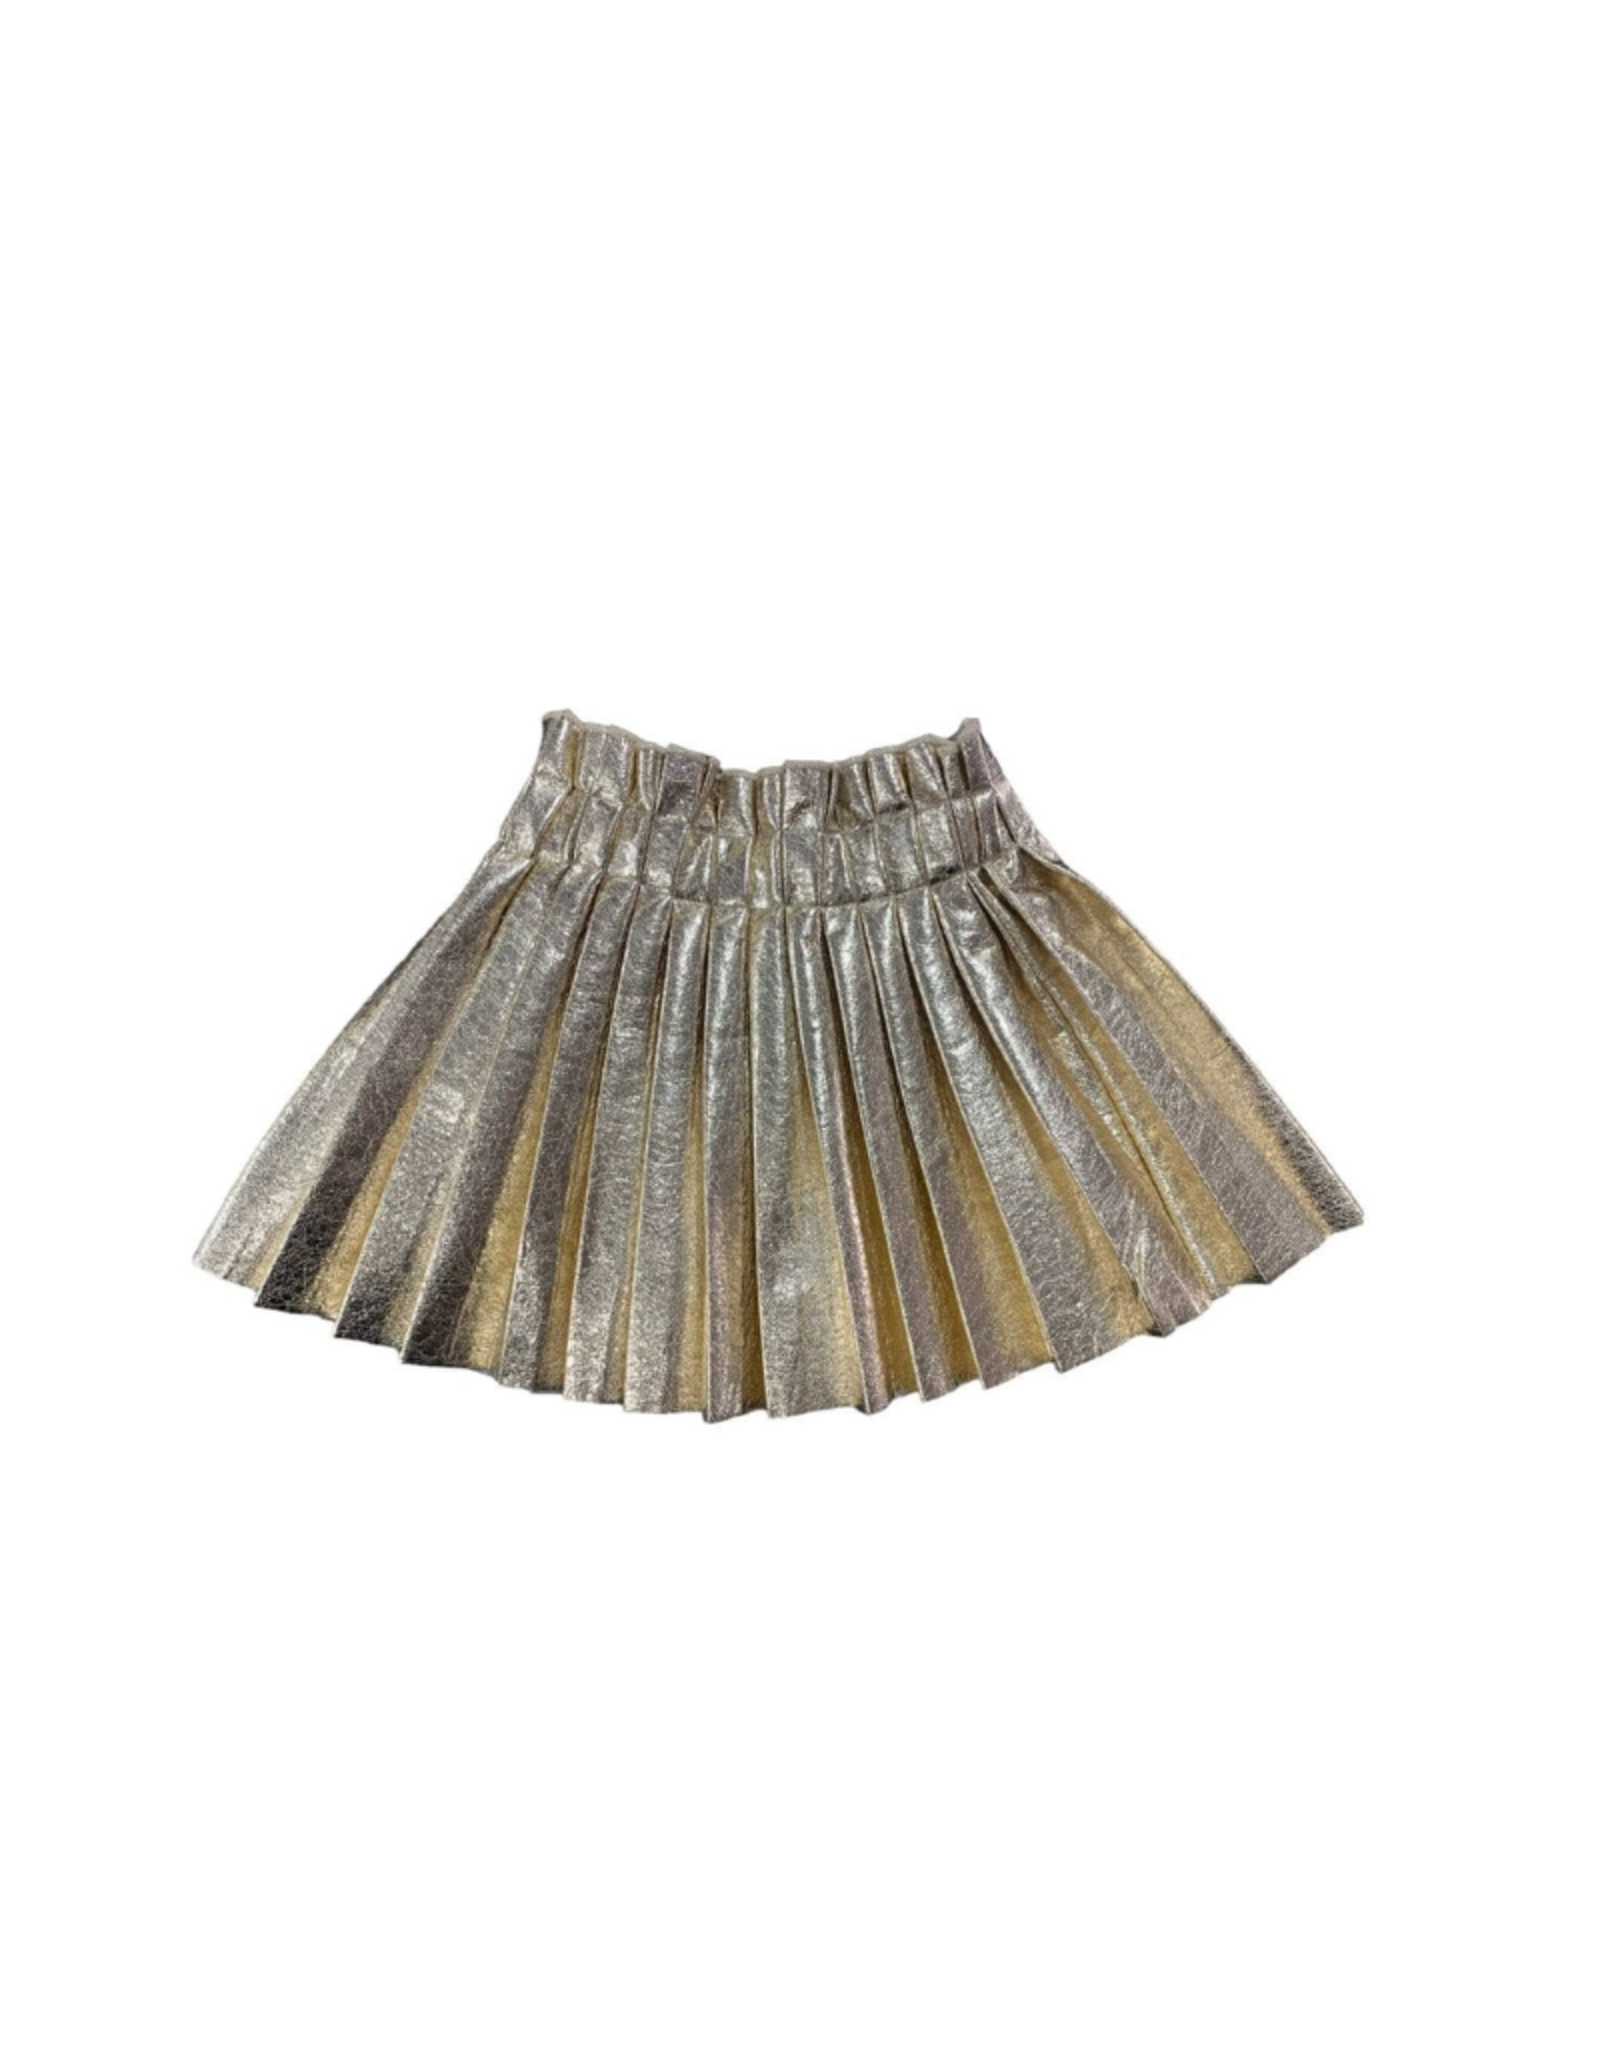 Lola and the Boys Gold Foil Pleated Skirt